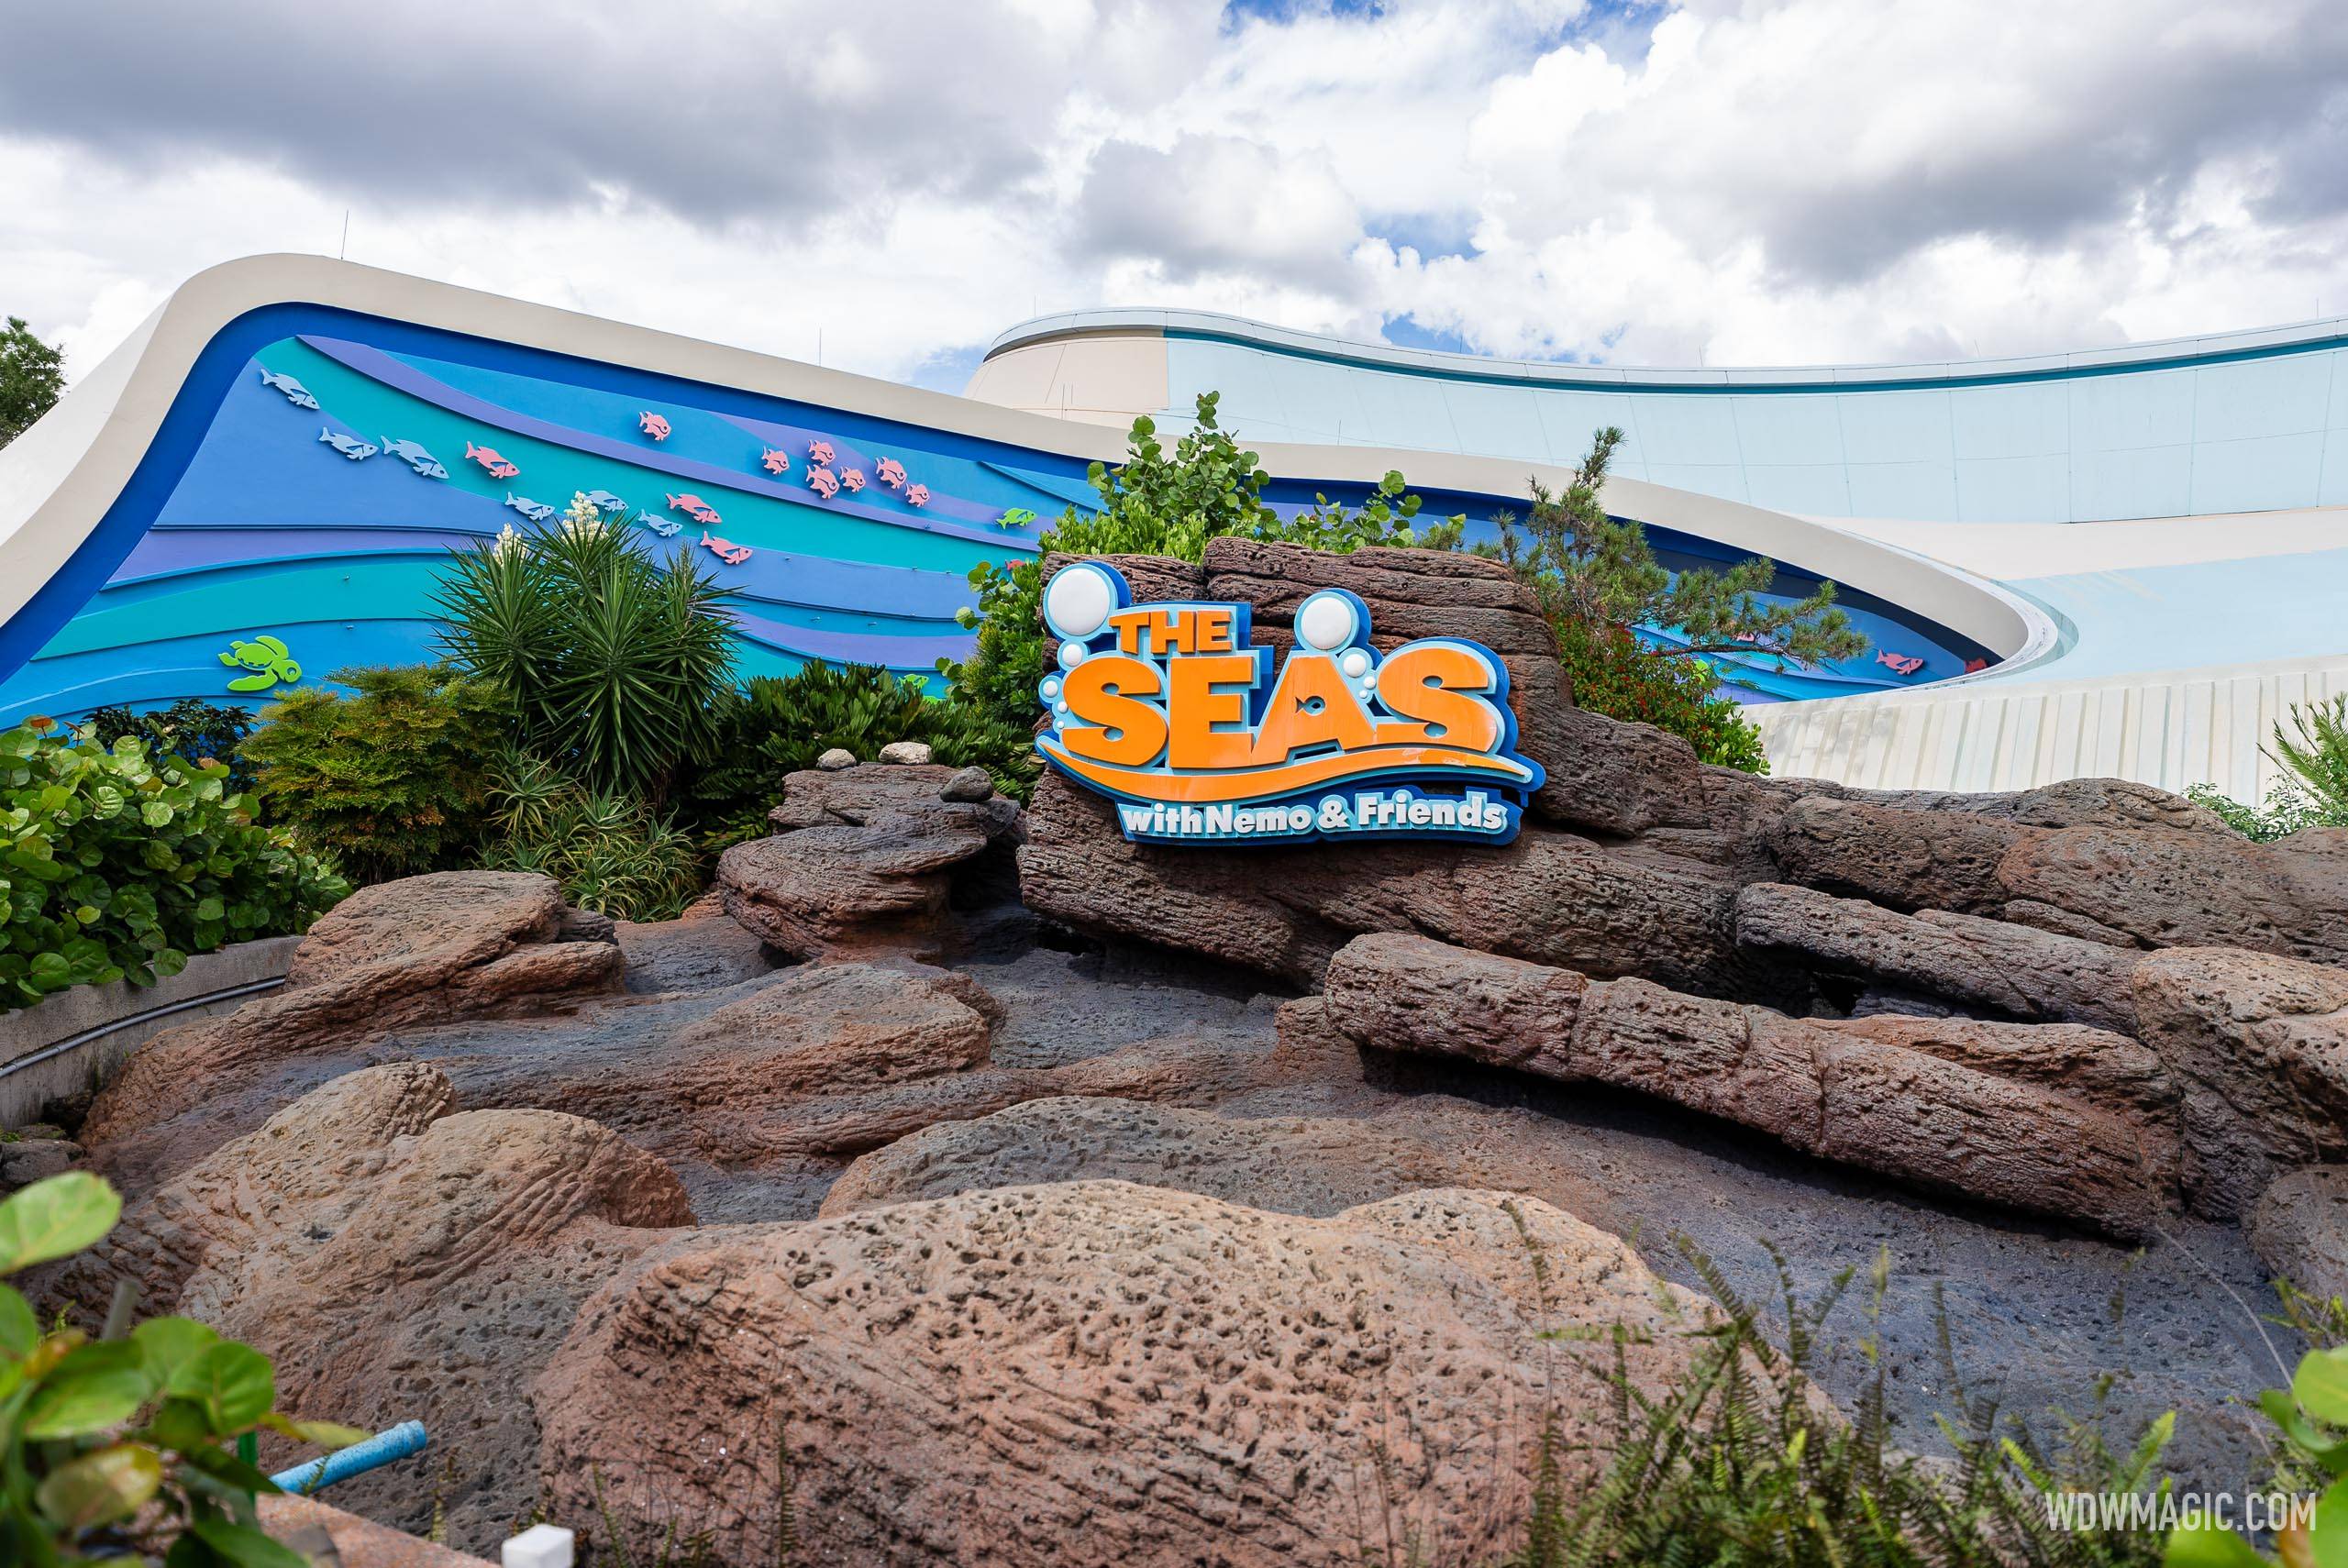 PHOTOS: Holiday Decor Integrated into Fish Tanks at The Seas with Nemo &  Friends at EPCOT - WDW News Today